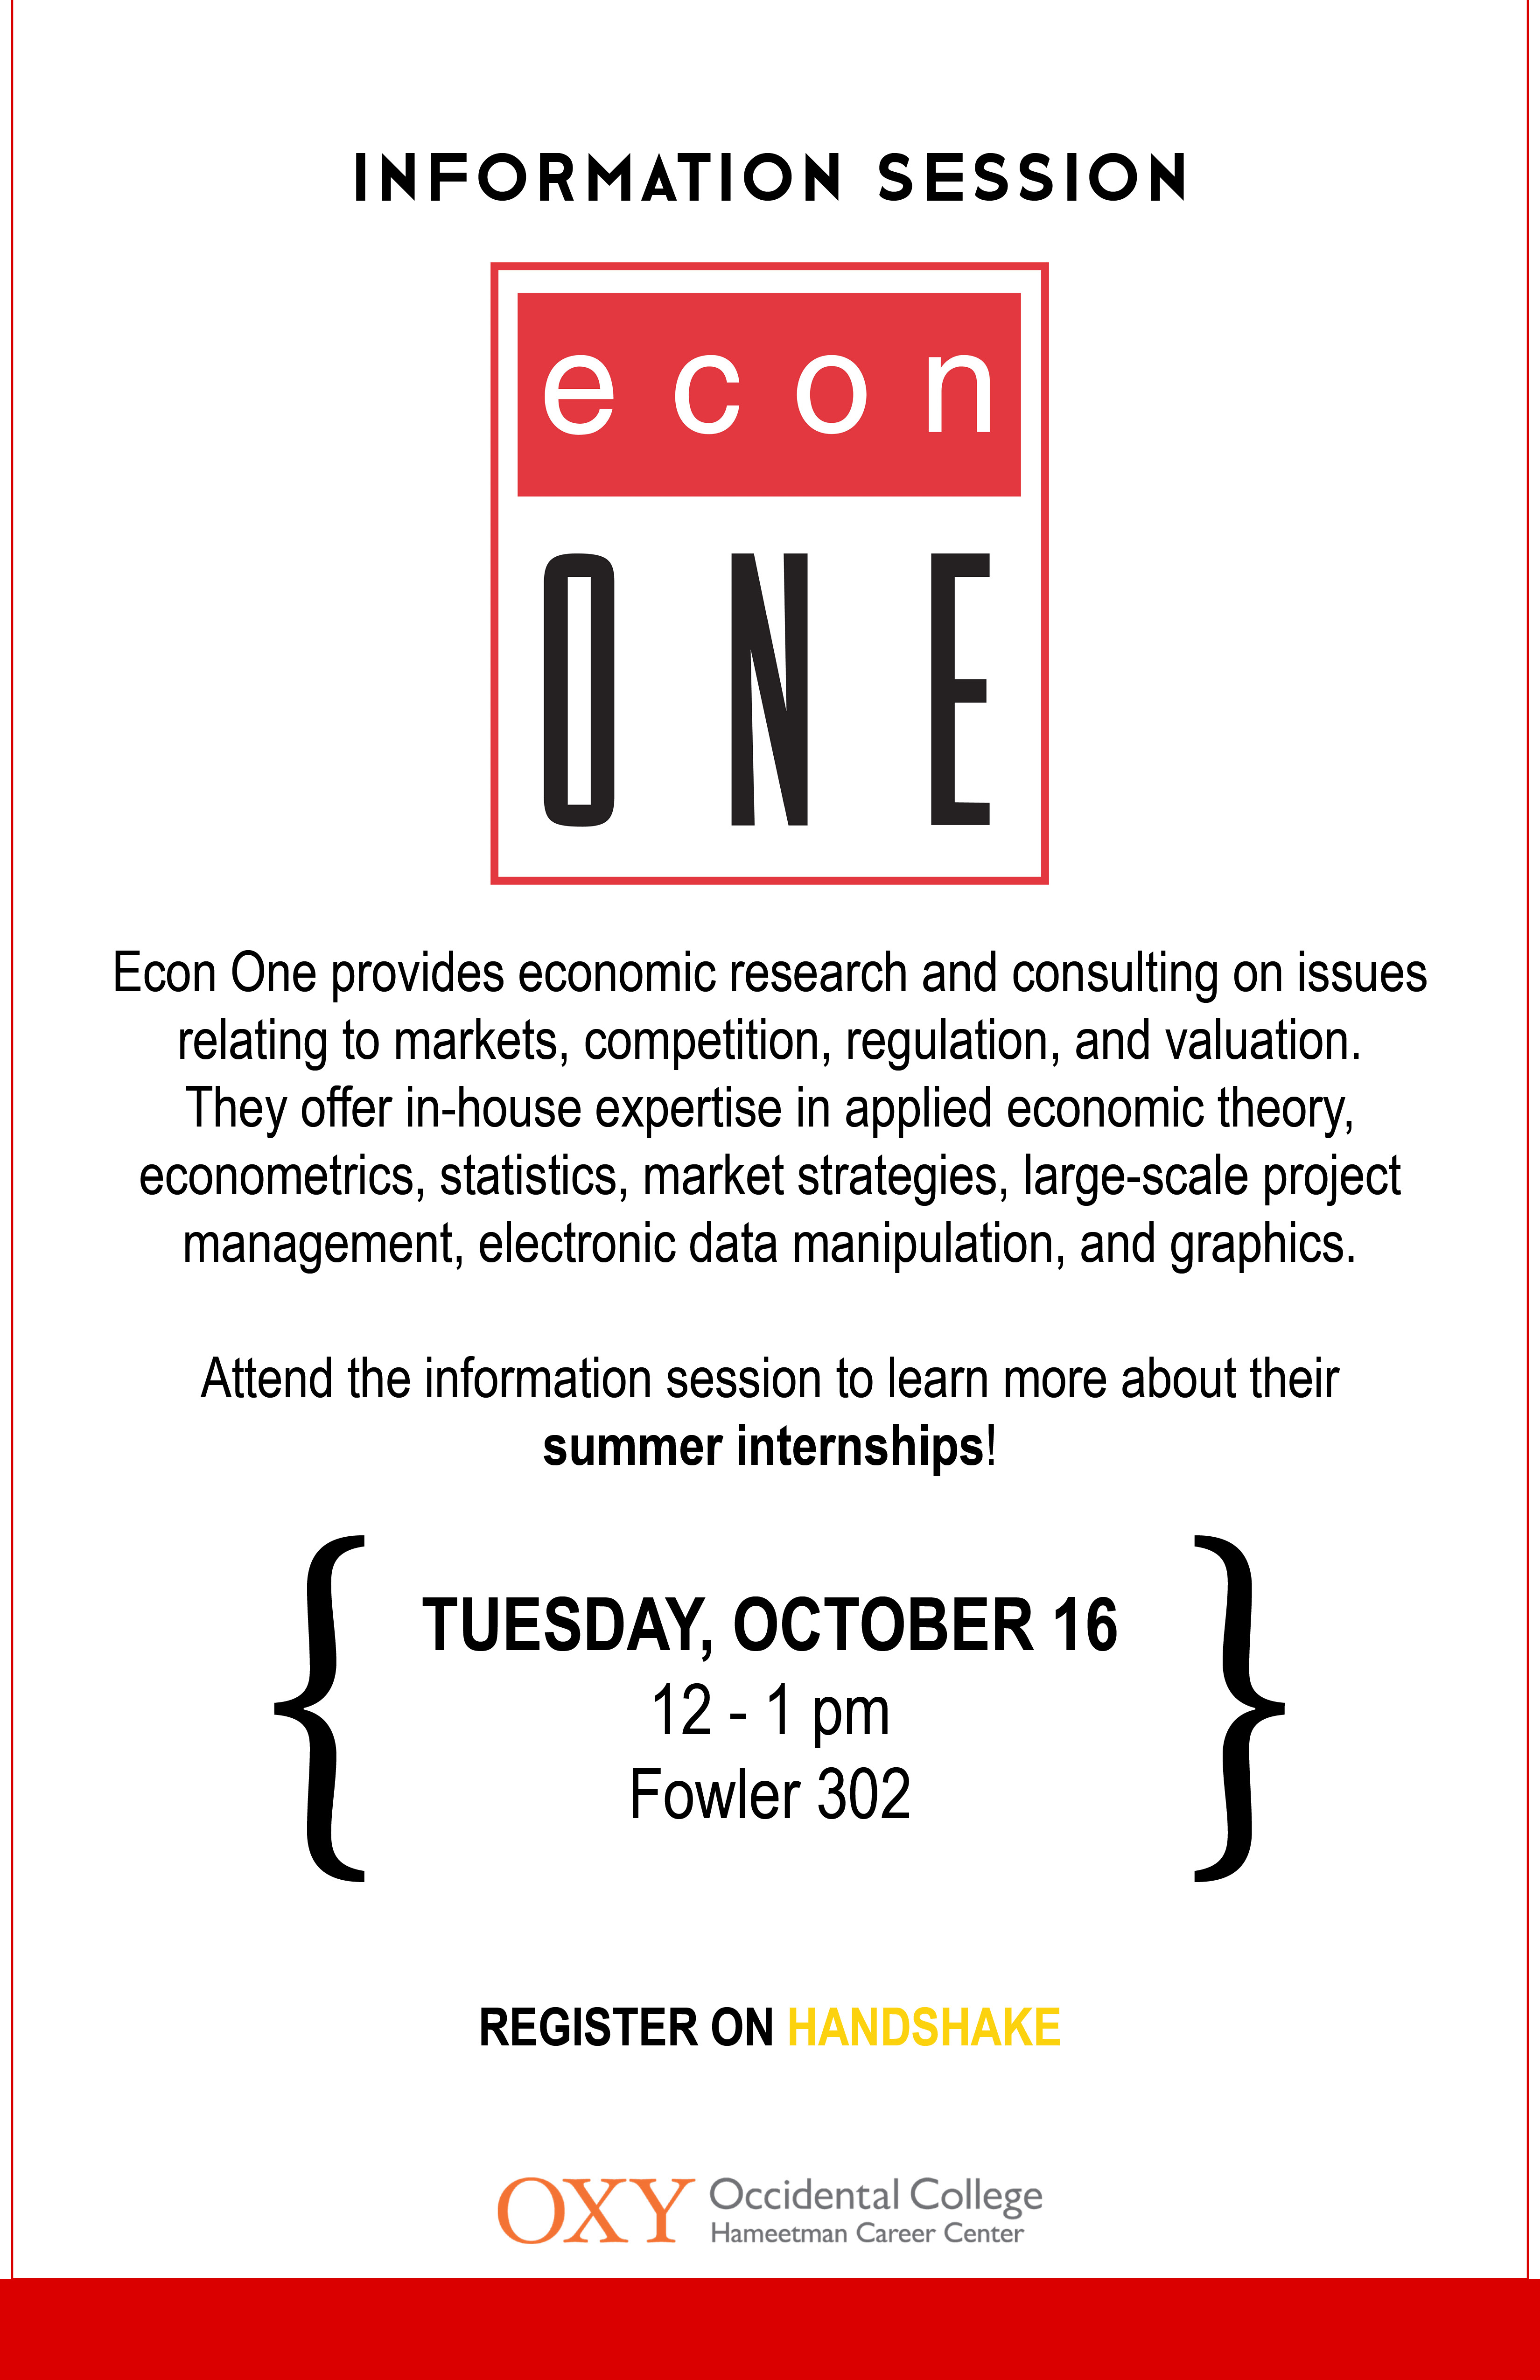 Image for Econ One Information Session Event